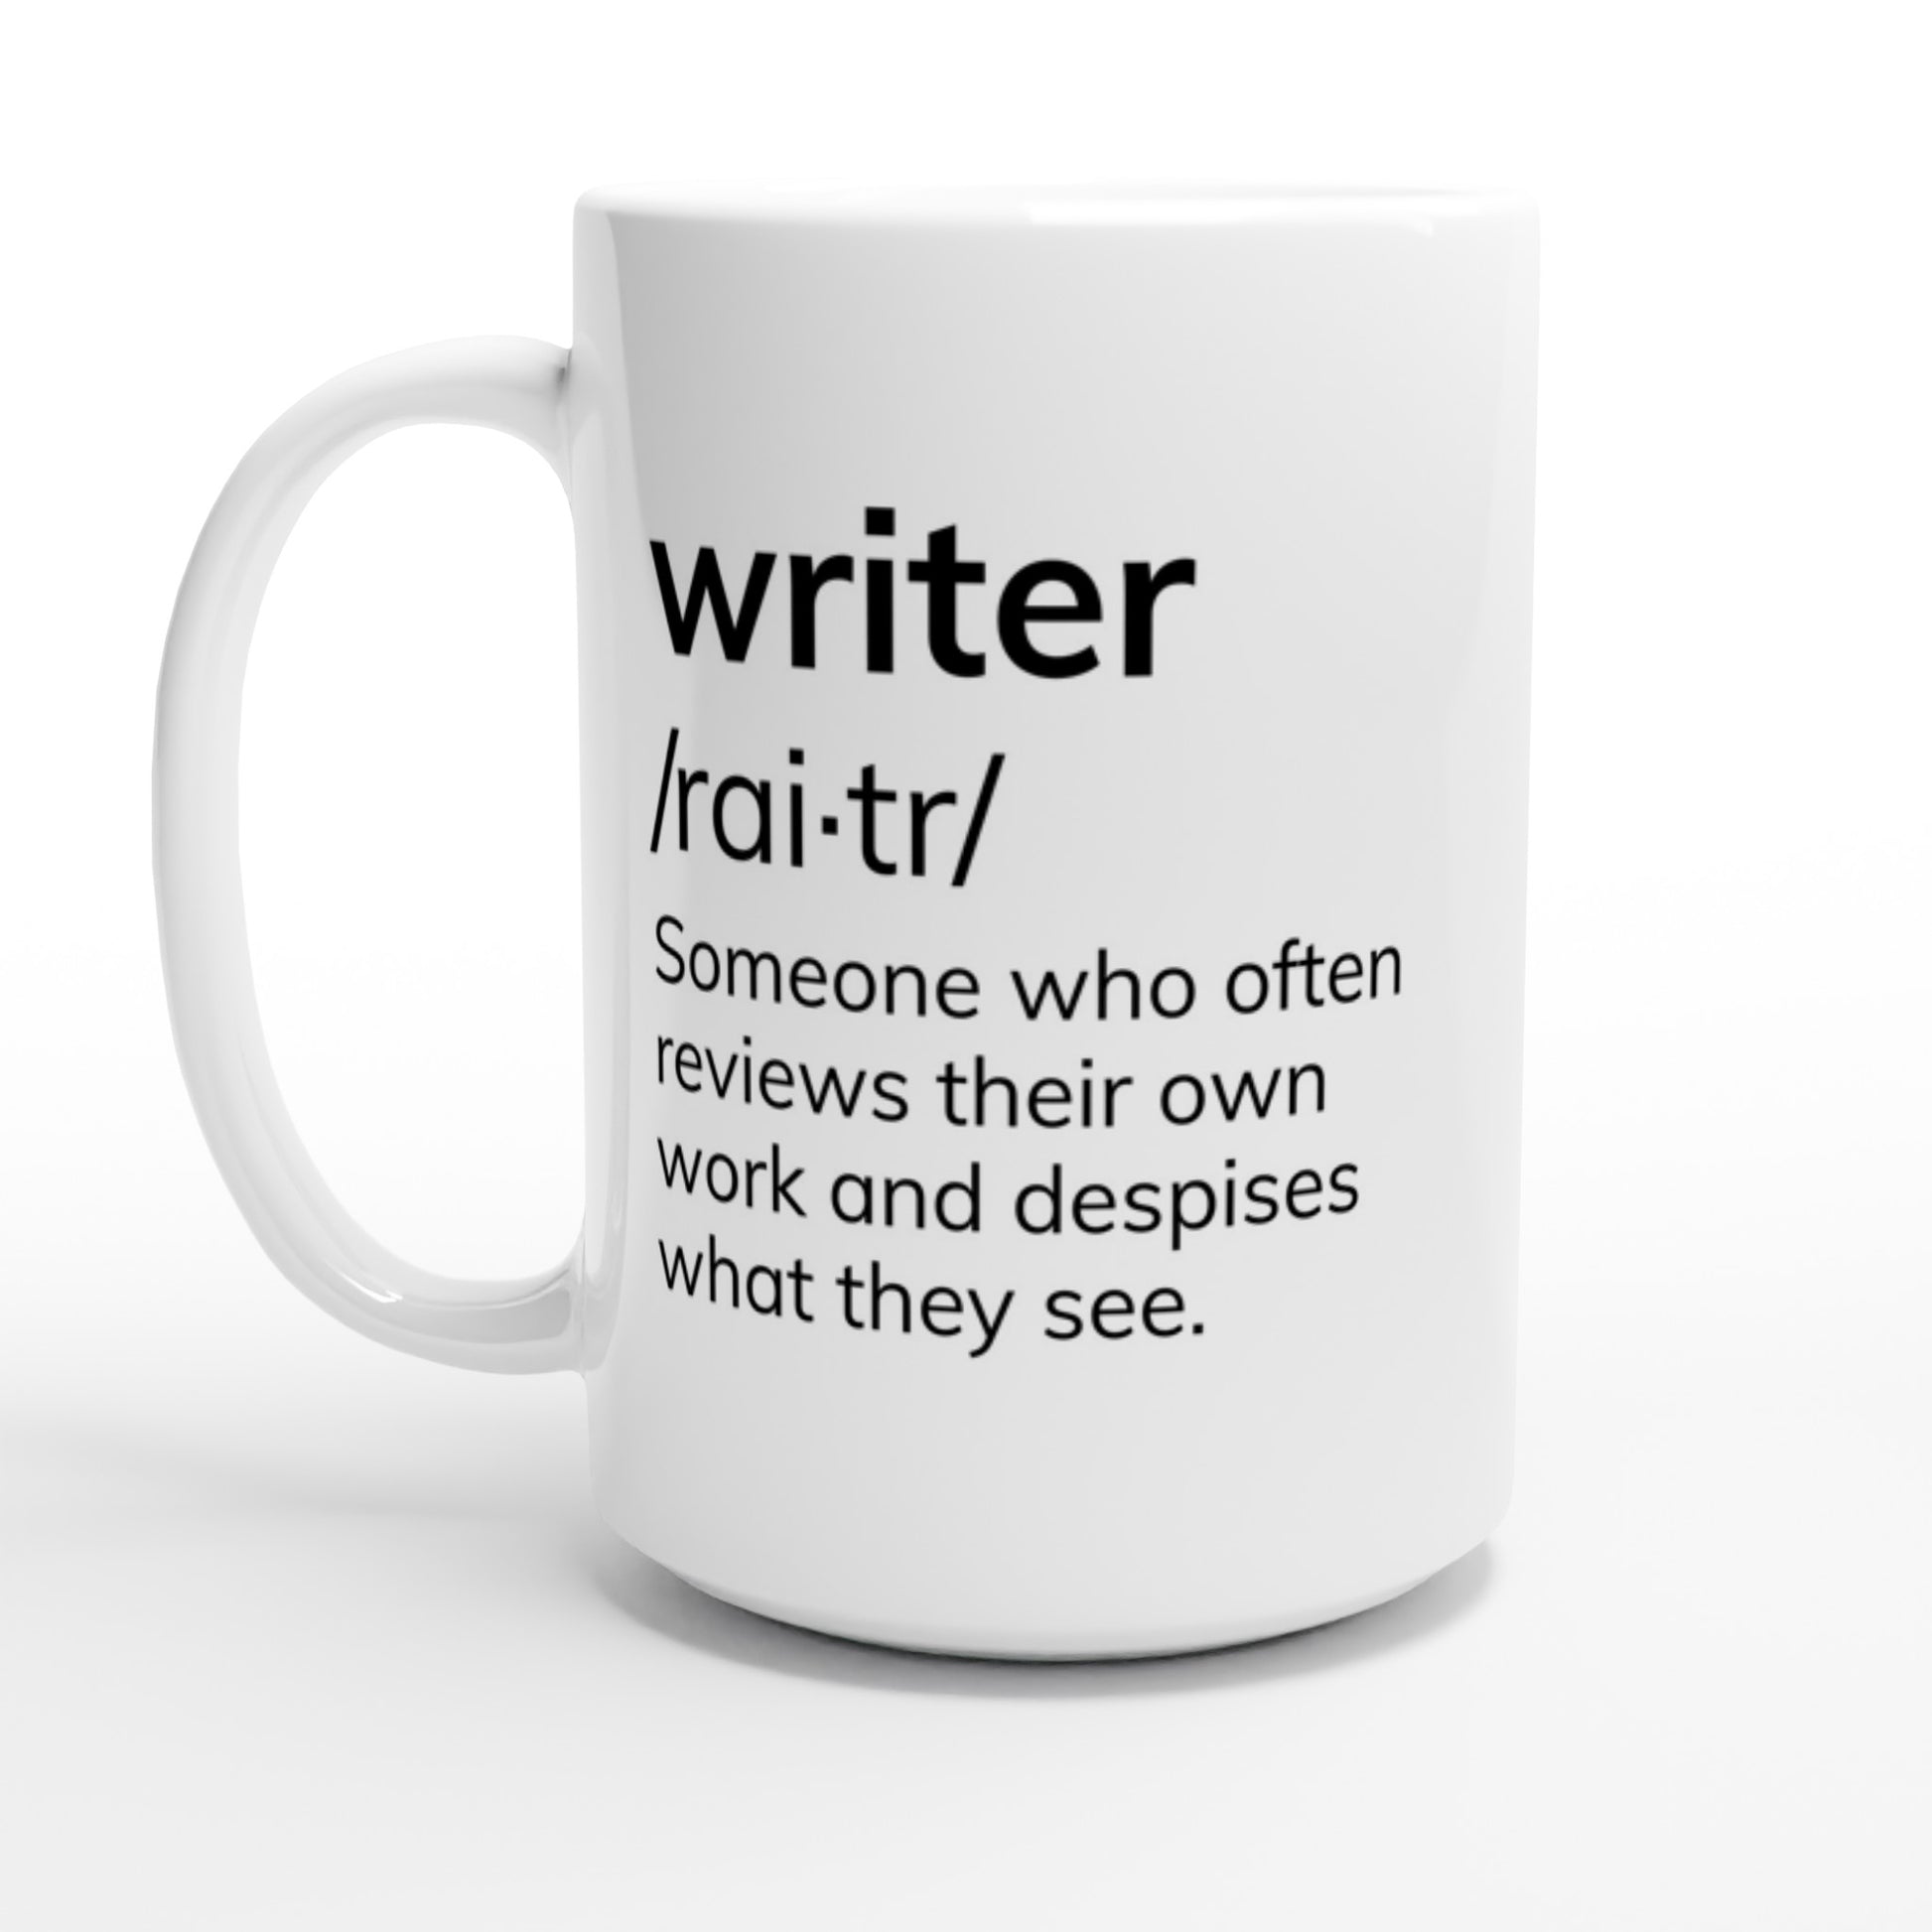 A white coffee mug for the "Writer: Someone who often reviews their own work and despises what they see." in you.